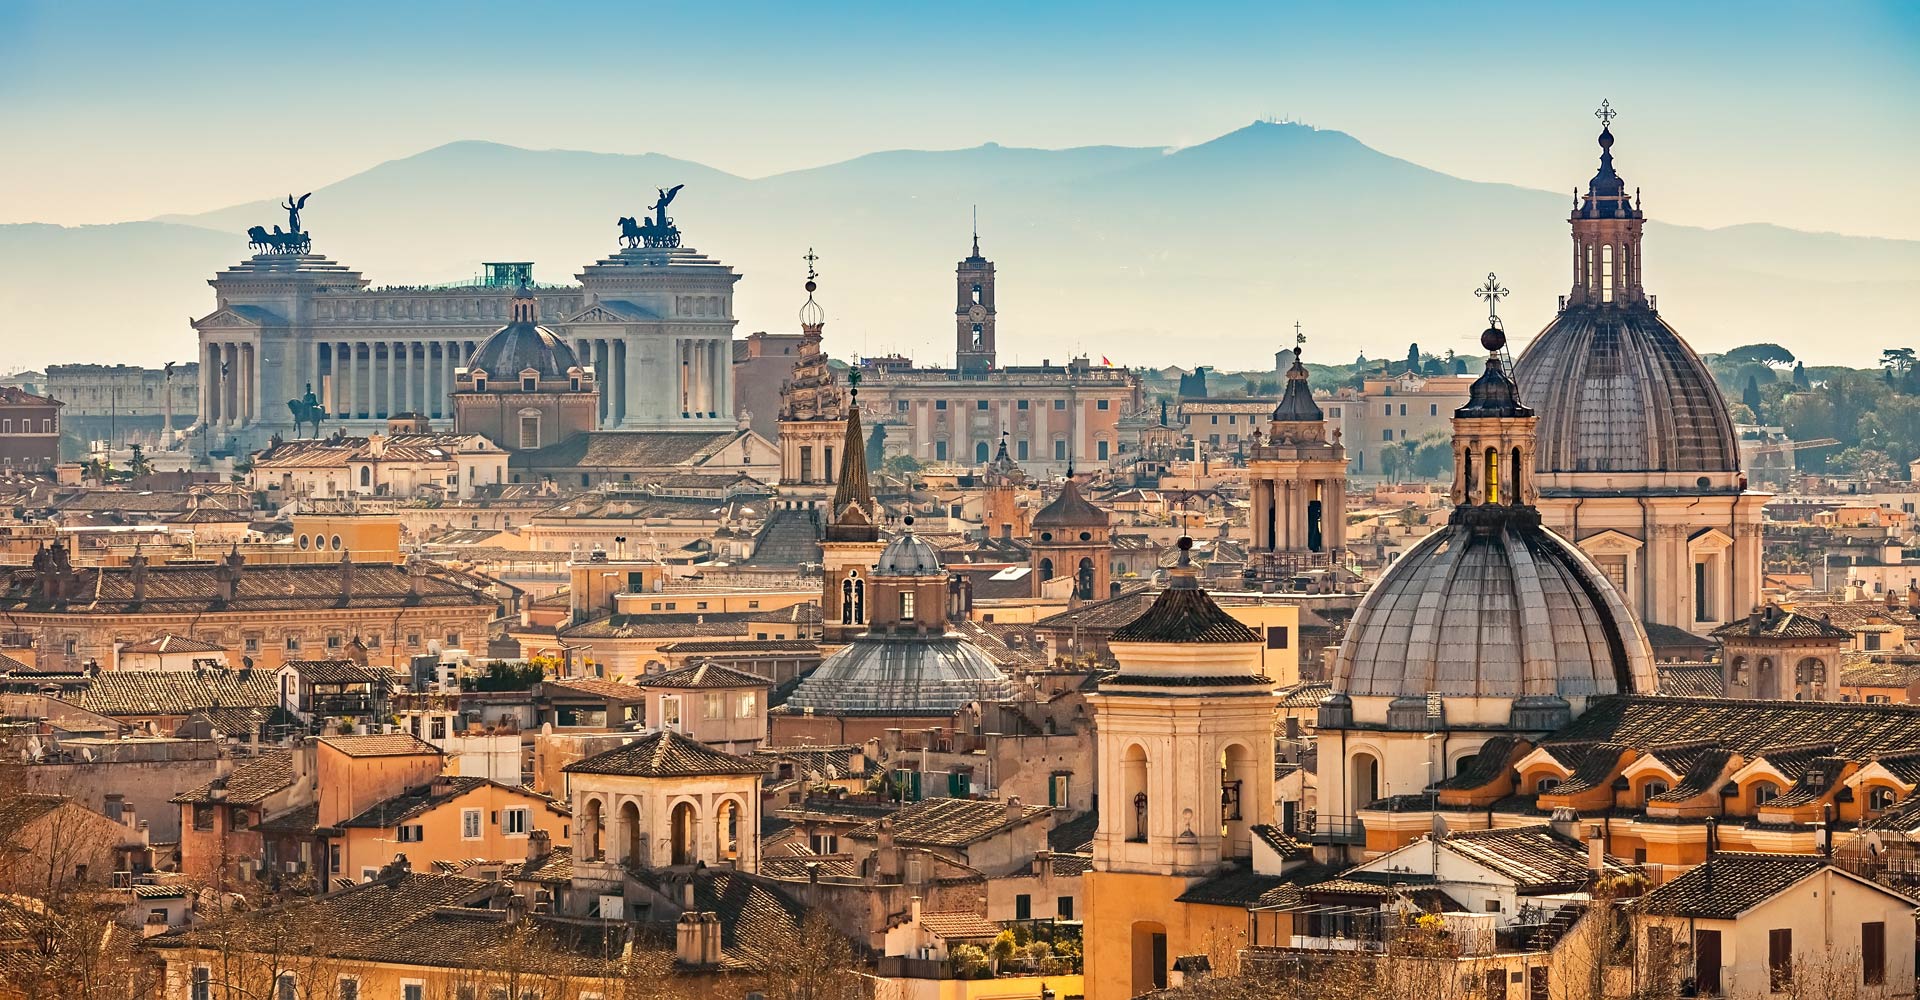 The eternal city of Rome: capital of Italy and cultural highlight.